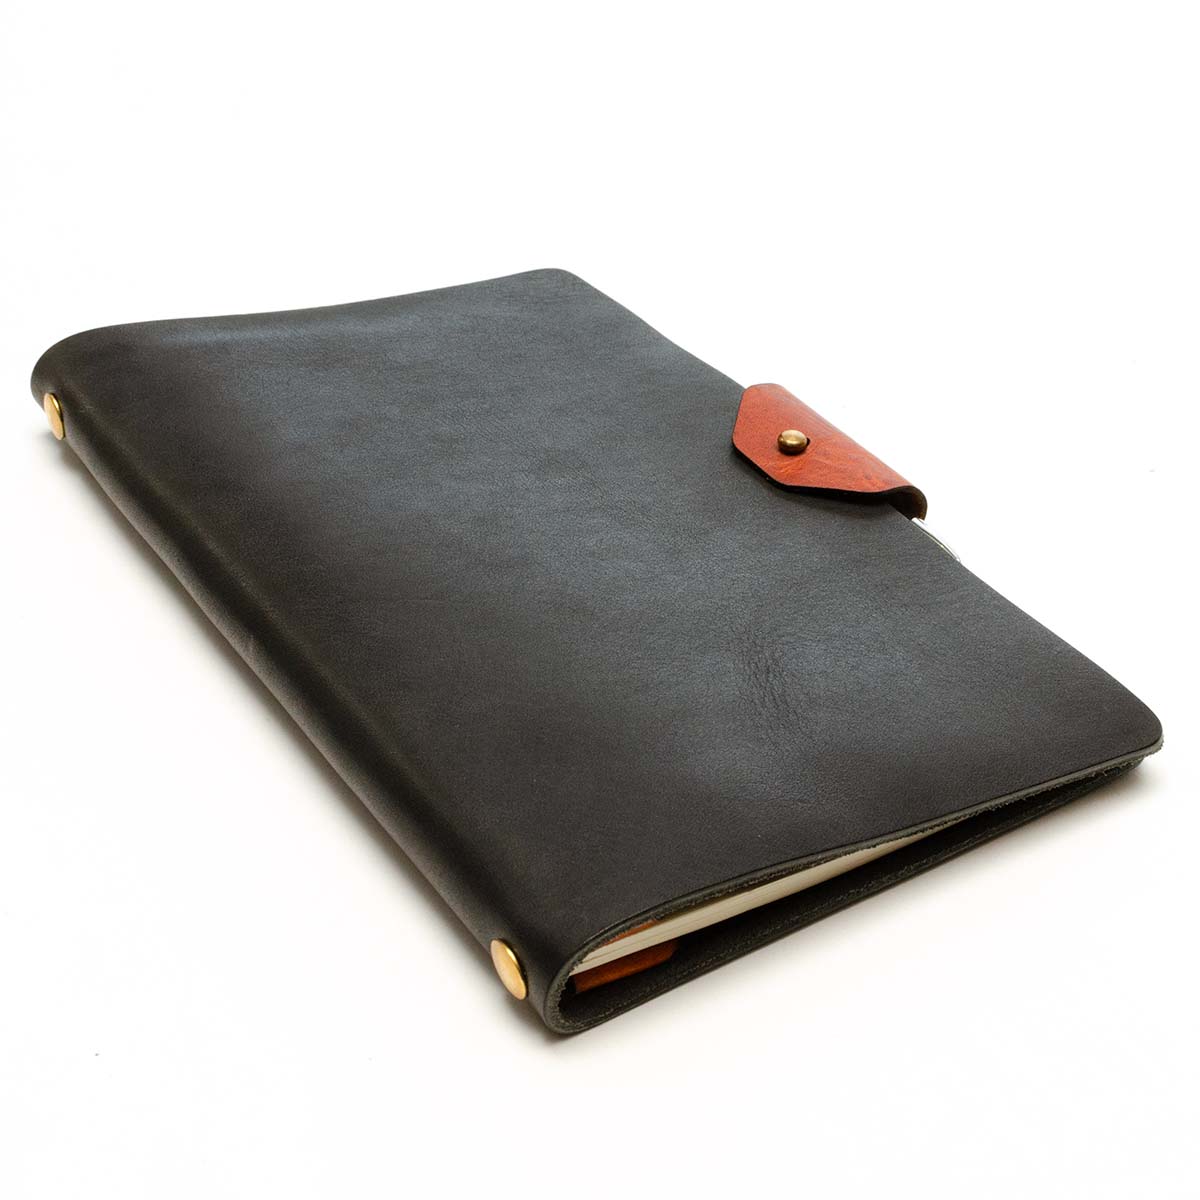 The Slot Notebook Cover